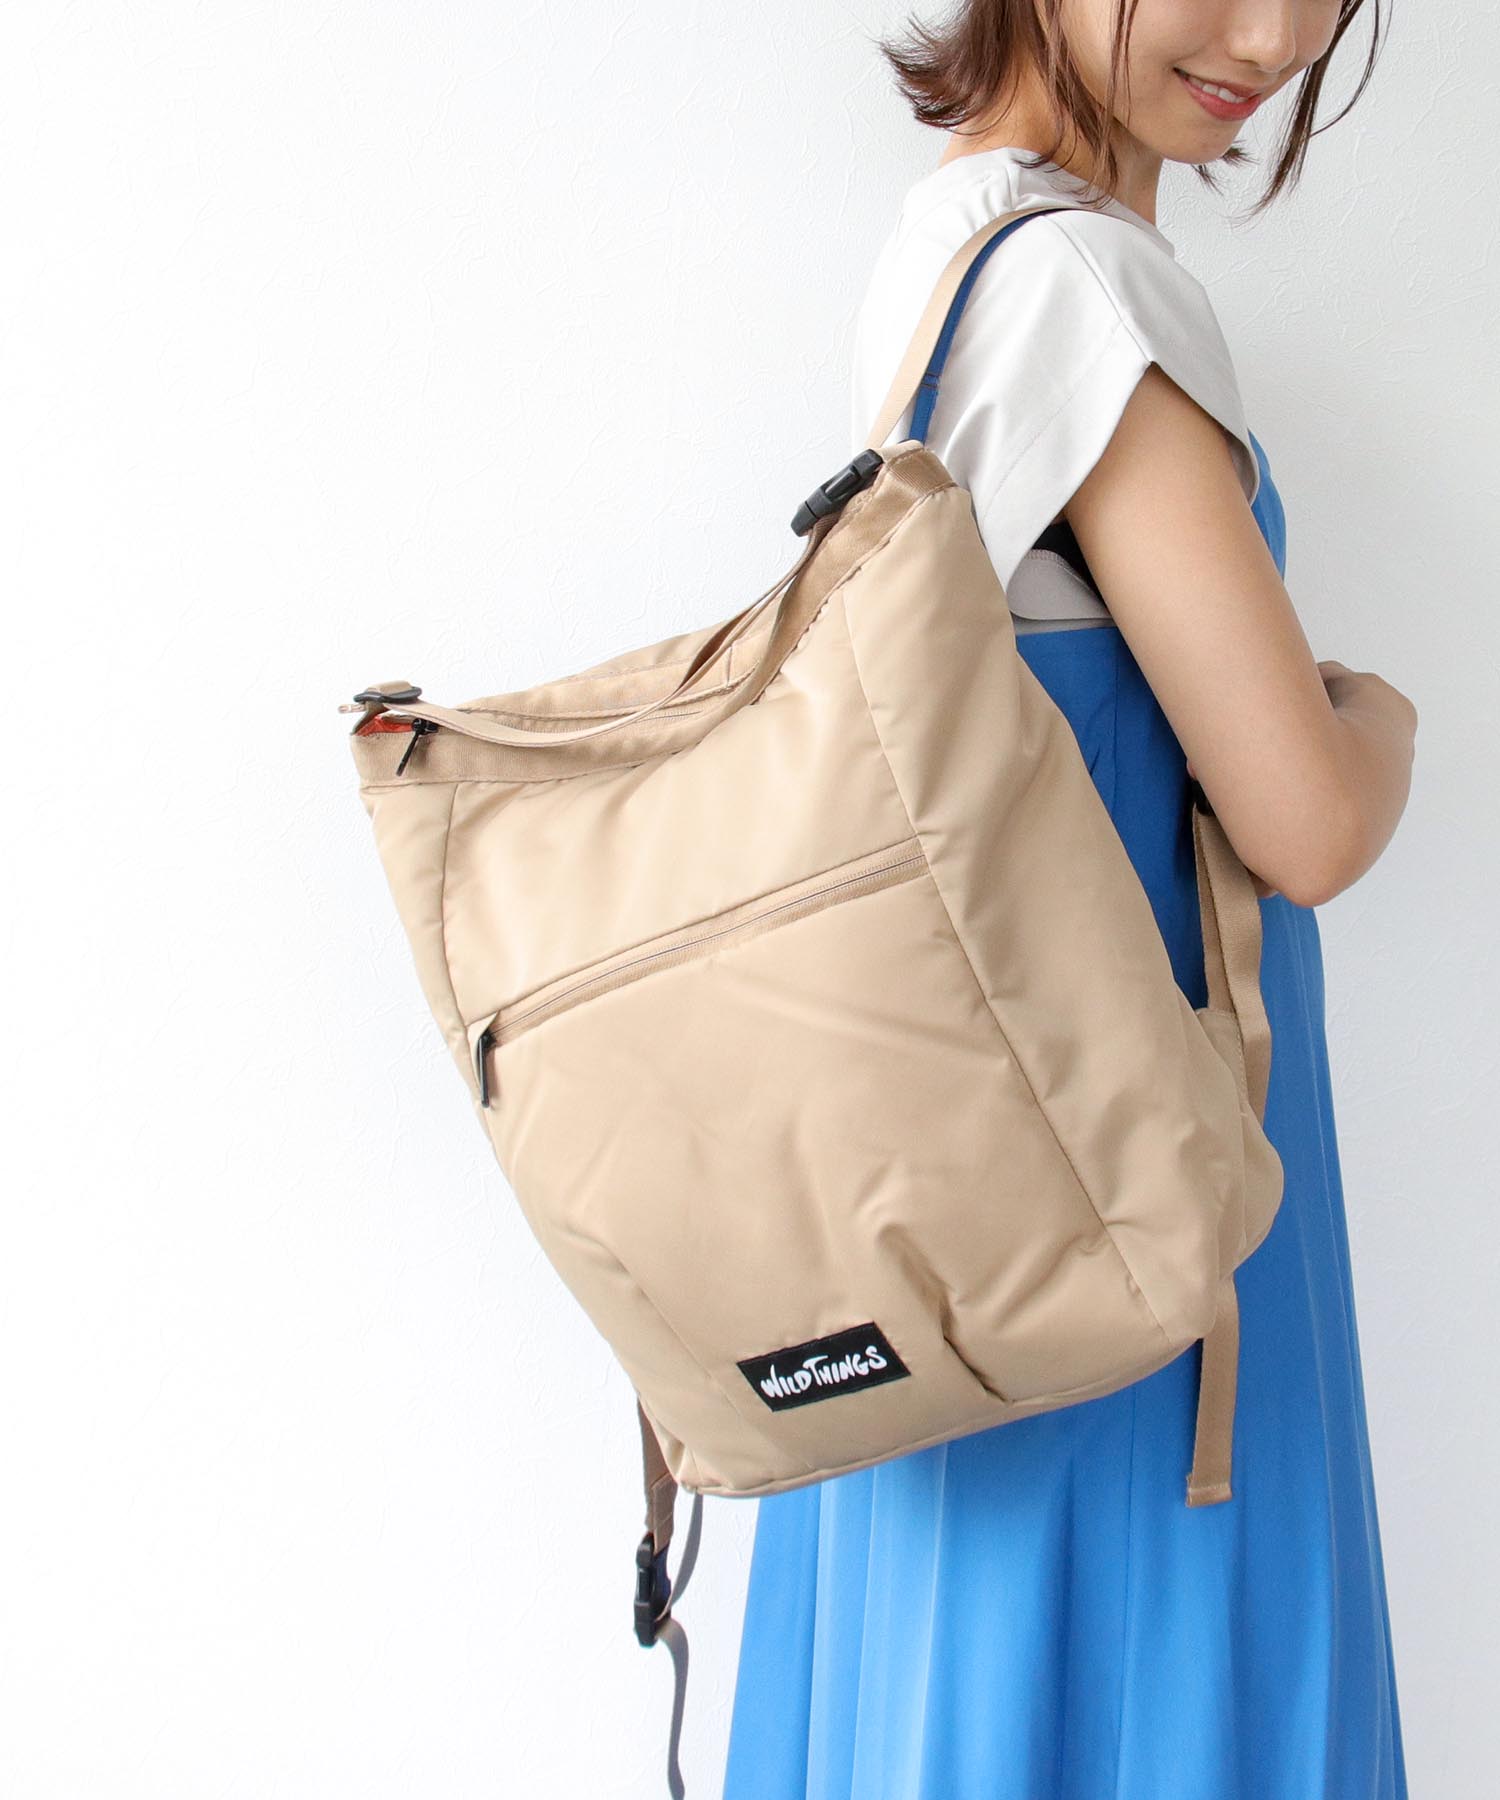 WILD THINGS/ワイルドシングス】2WAYBAG | AND ON JIONE STORE